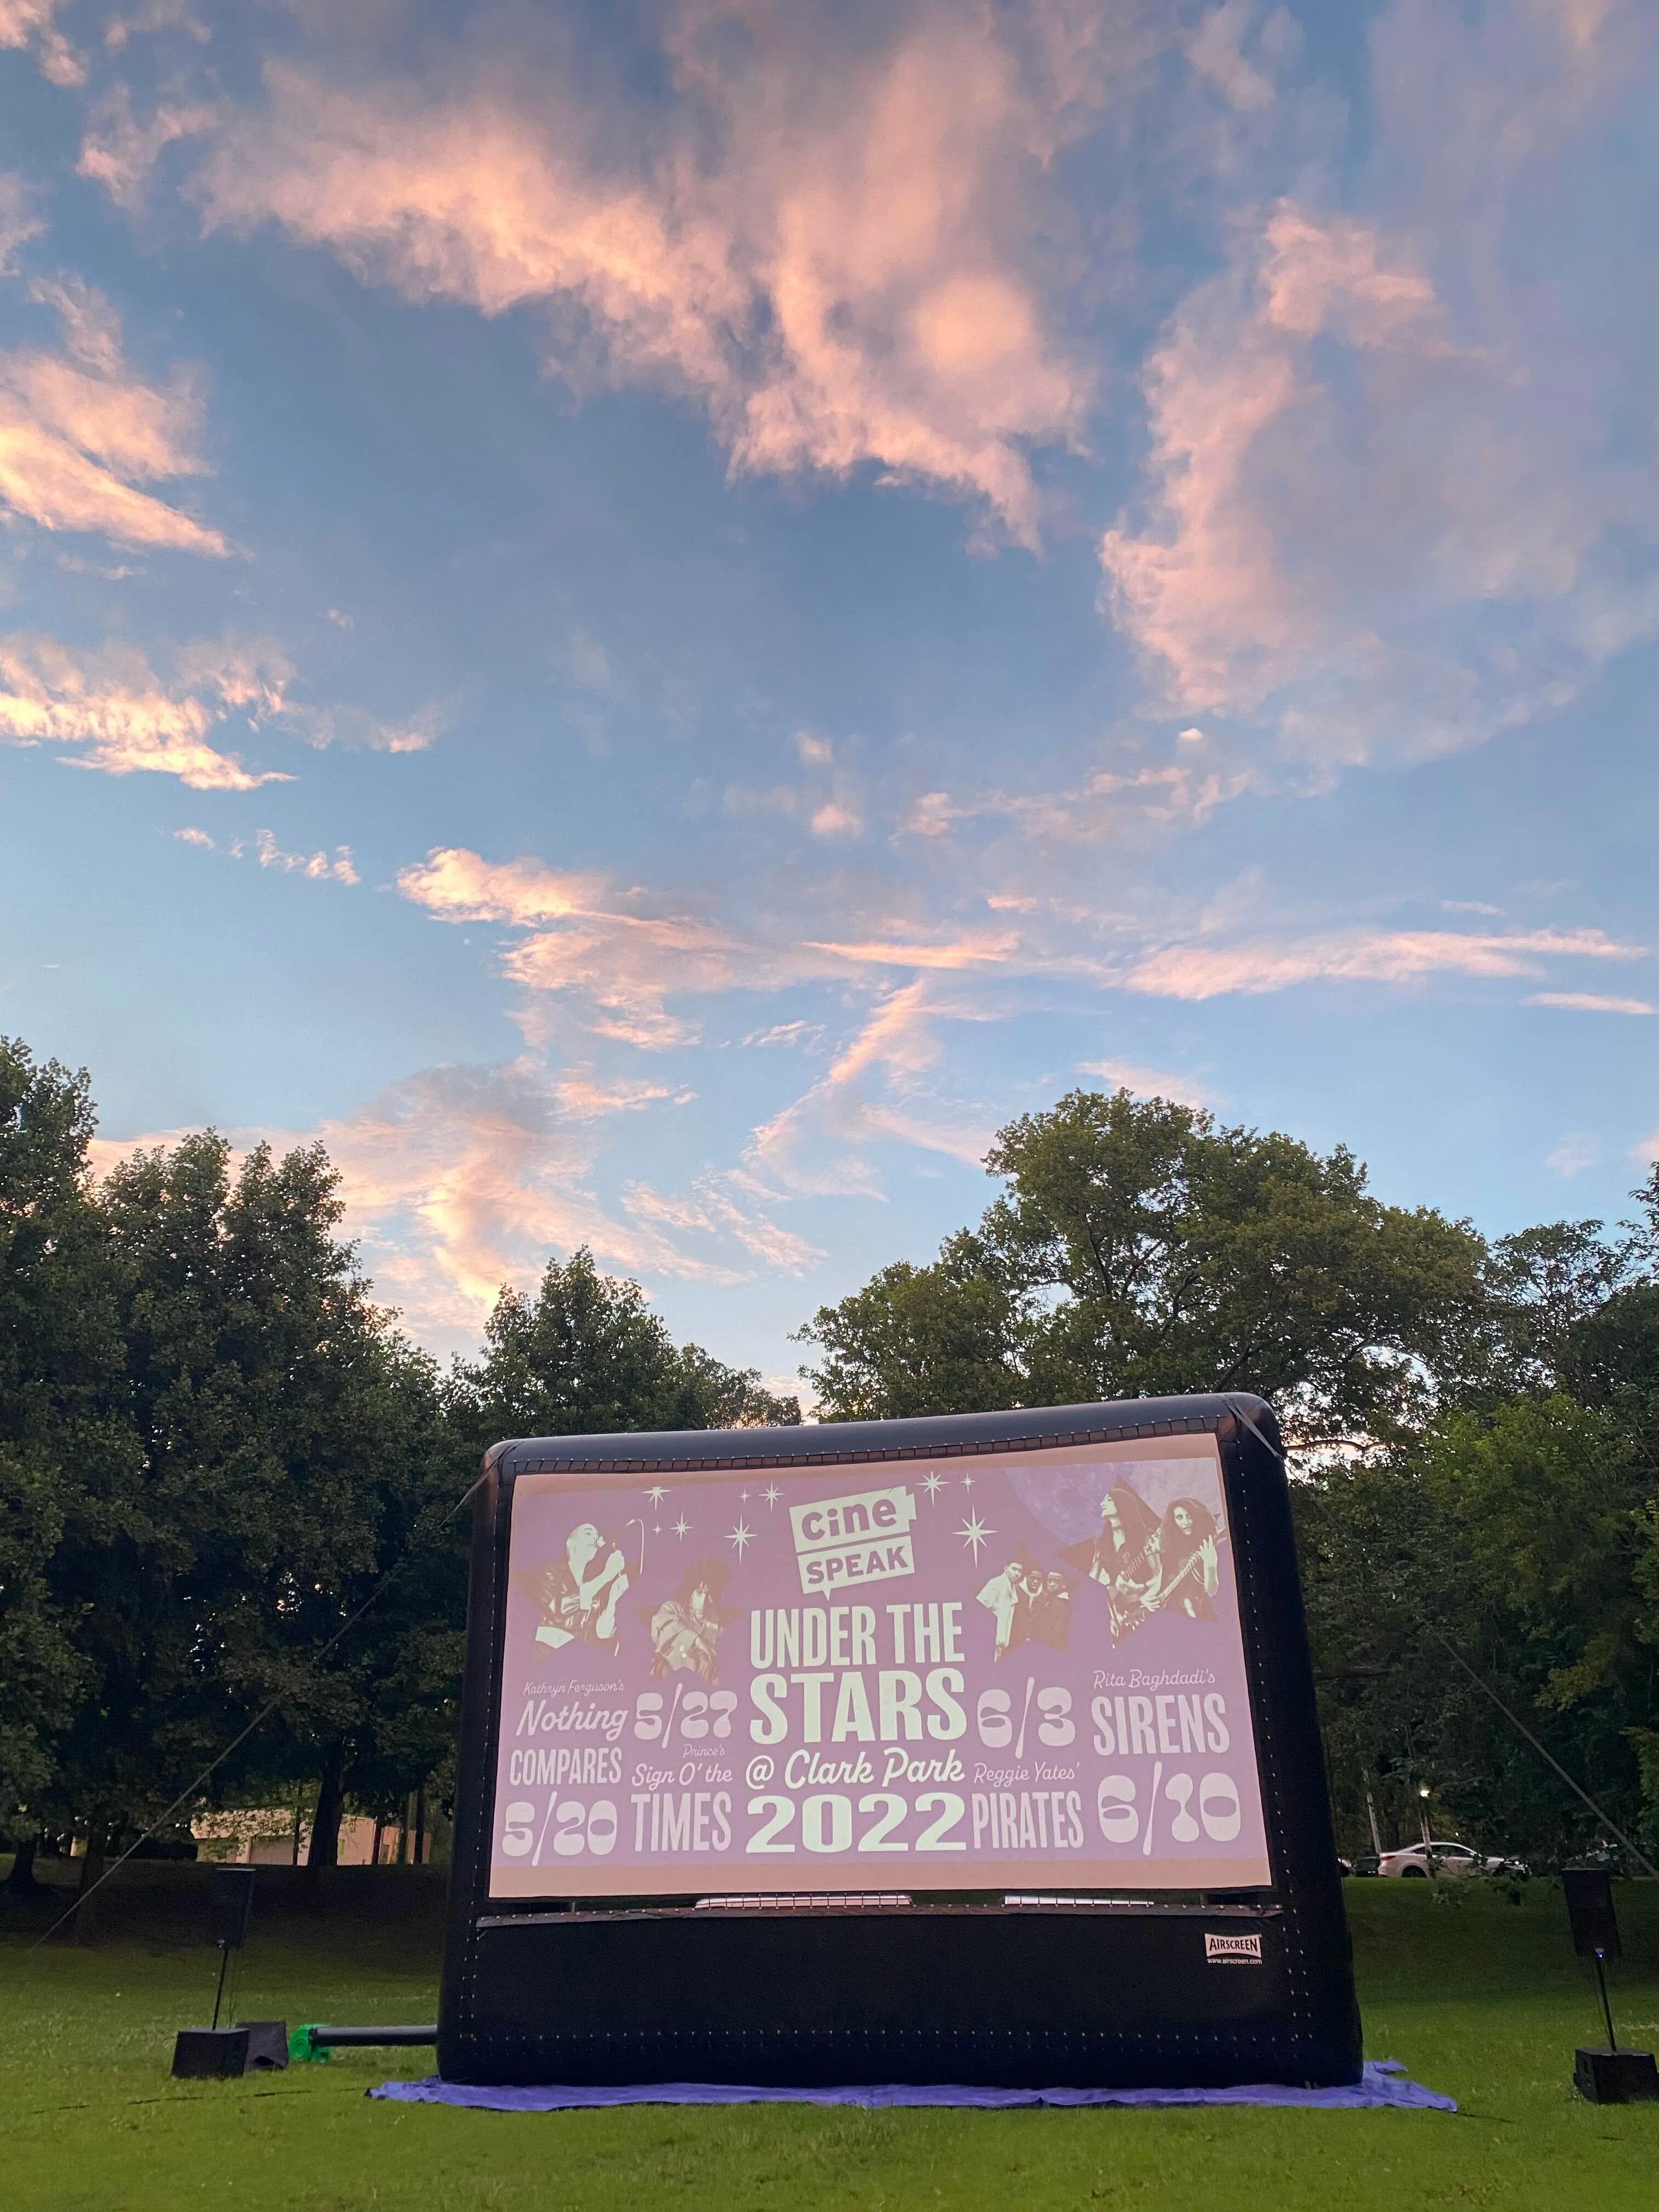 Since 2013, cinéSPEAK has been pursuing a mission, to engage “diverse audiences through our globally-minded contemporary and repertory independent film programming," including regular events at Clark Park. 